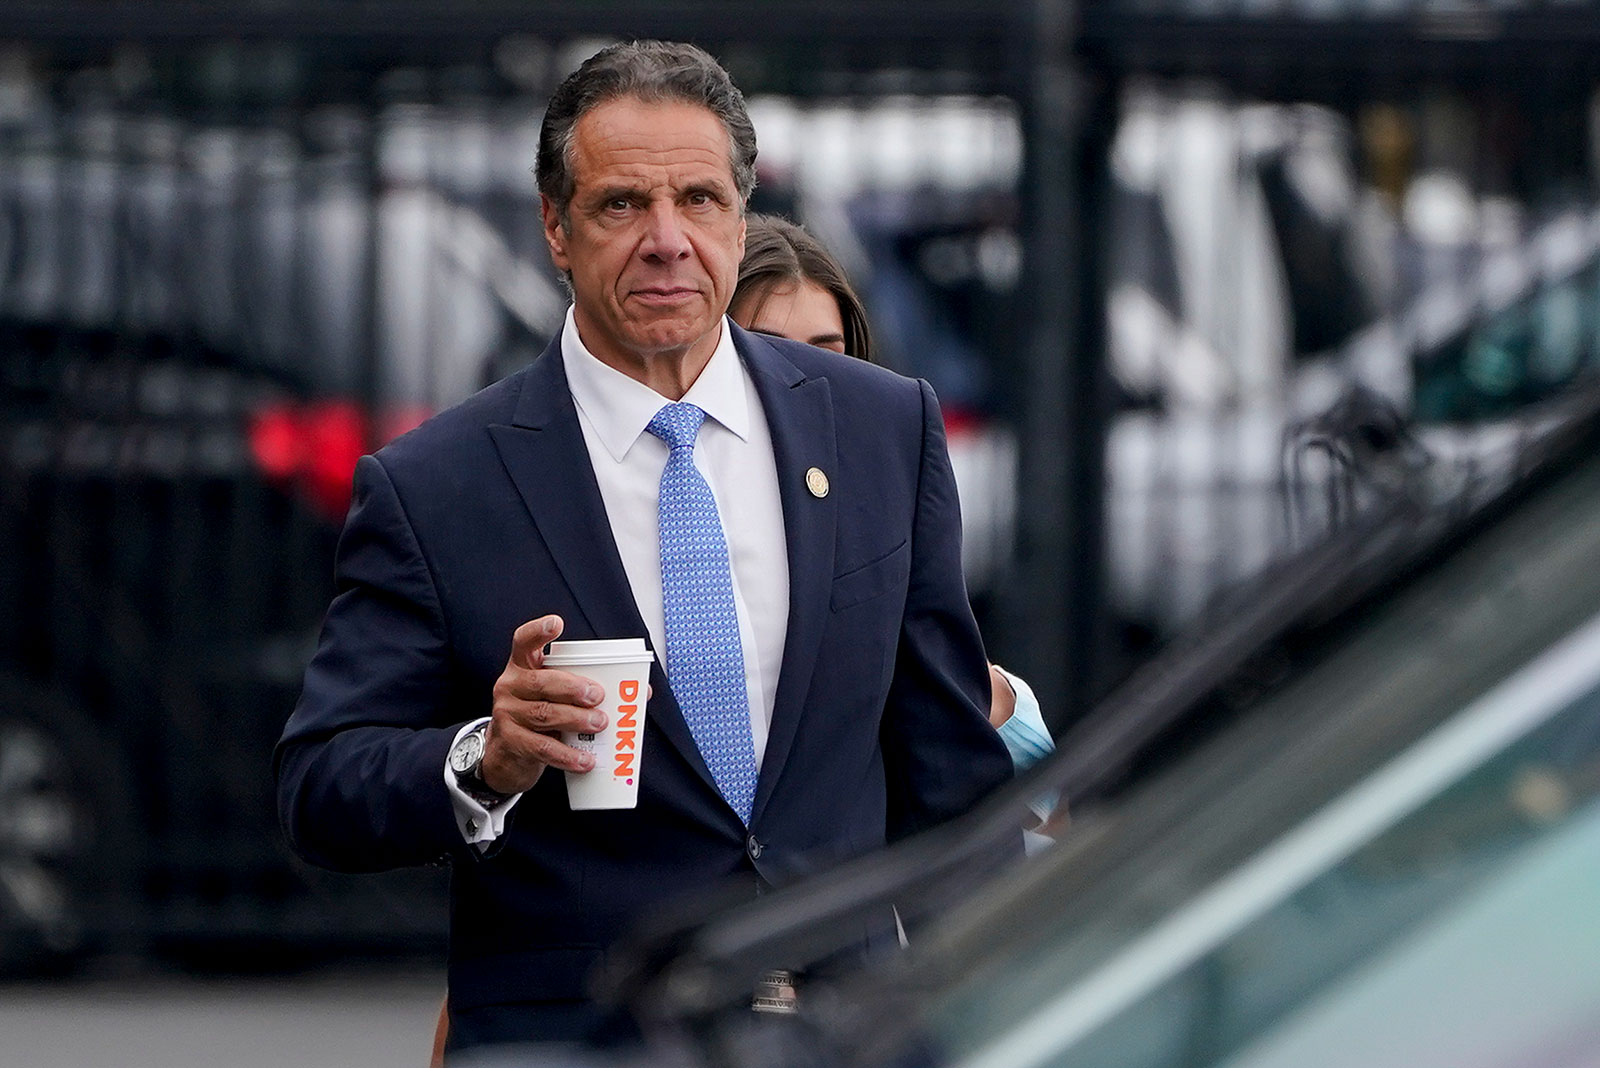 August 10 2021 Andrew Cuomo News